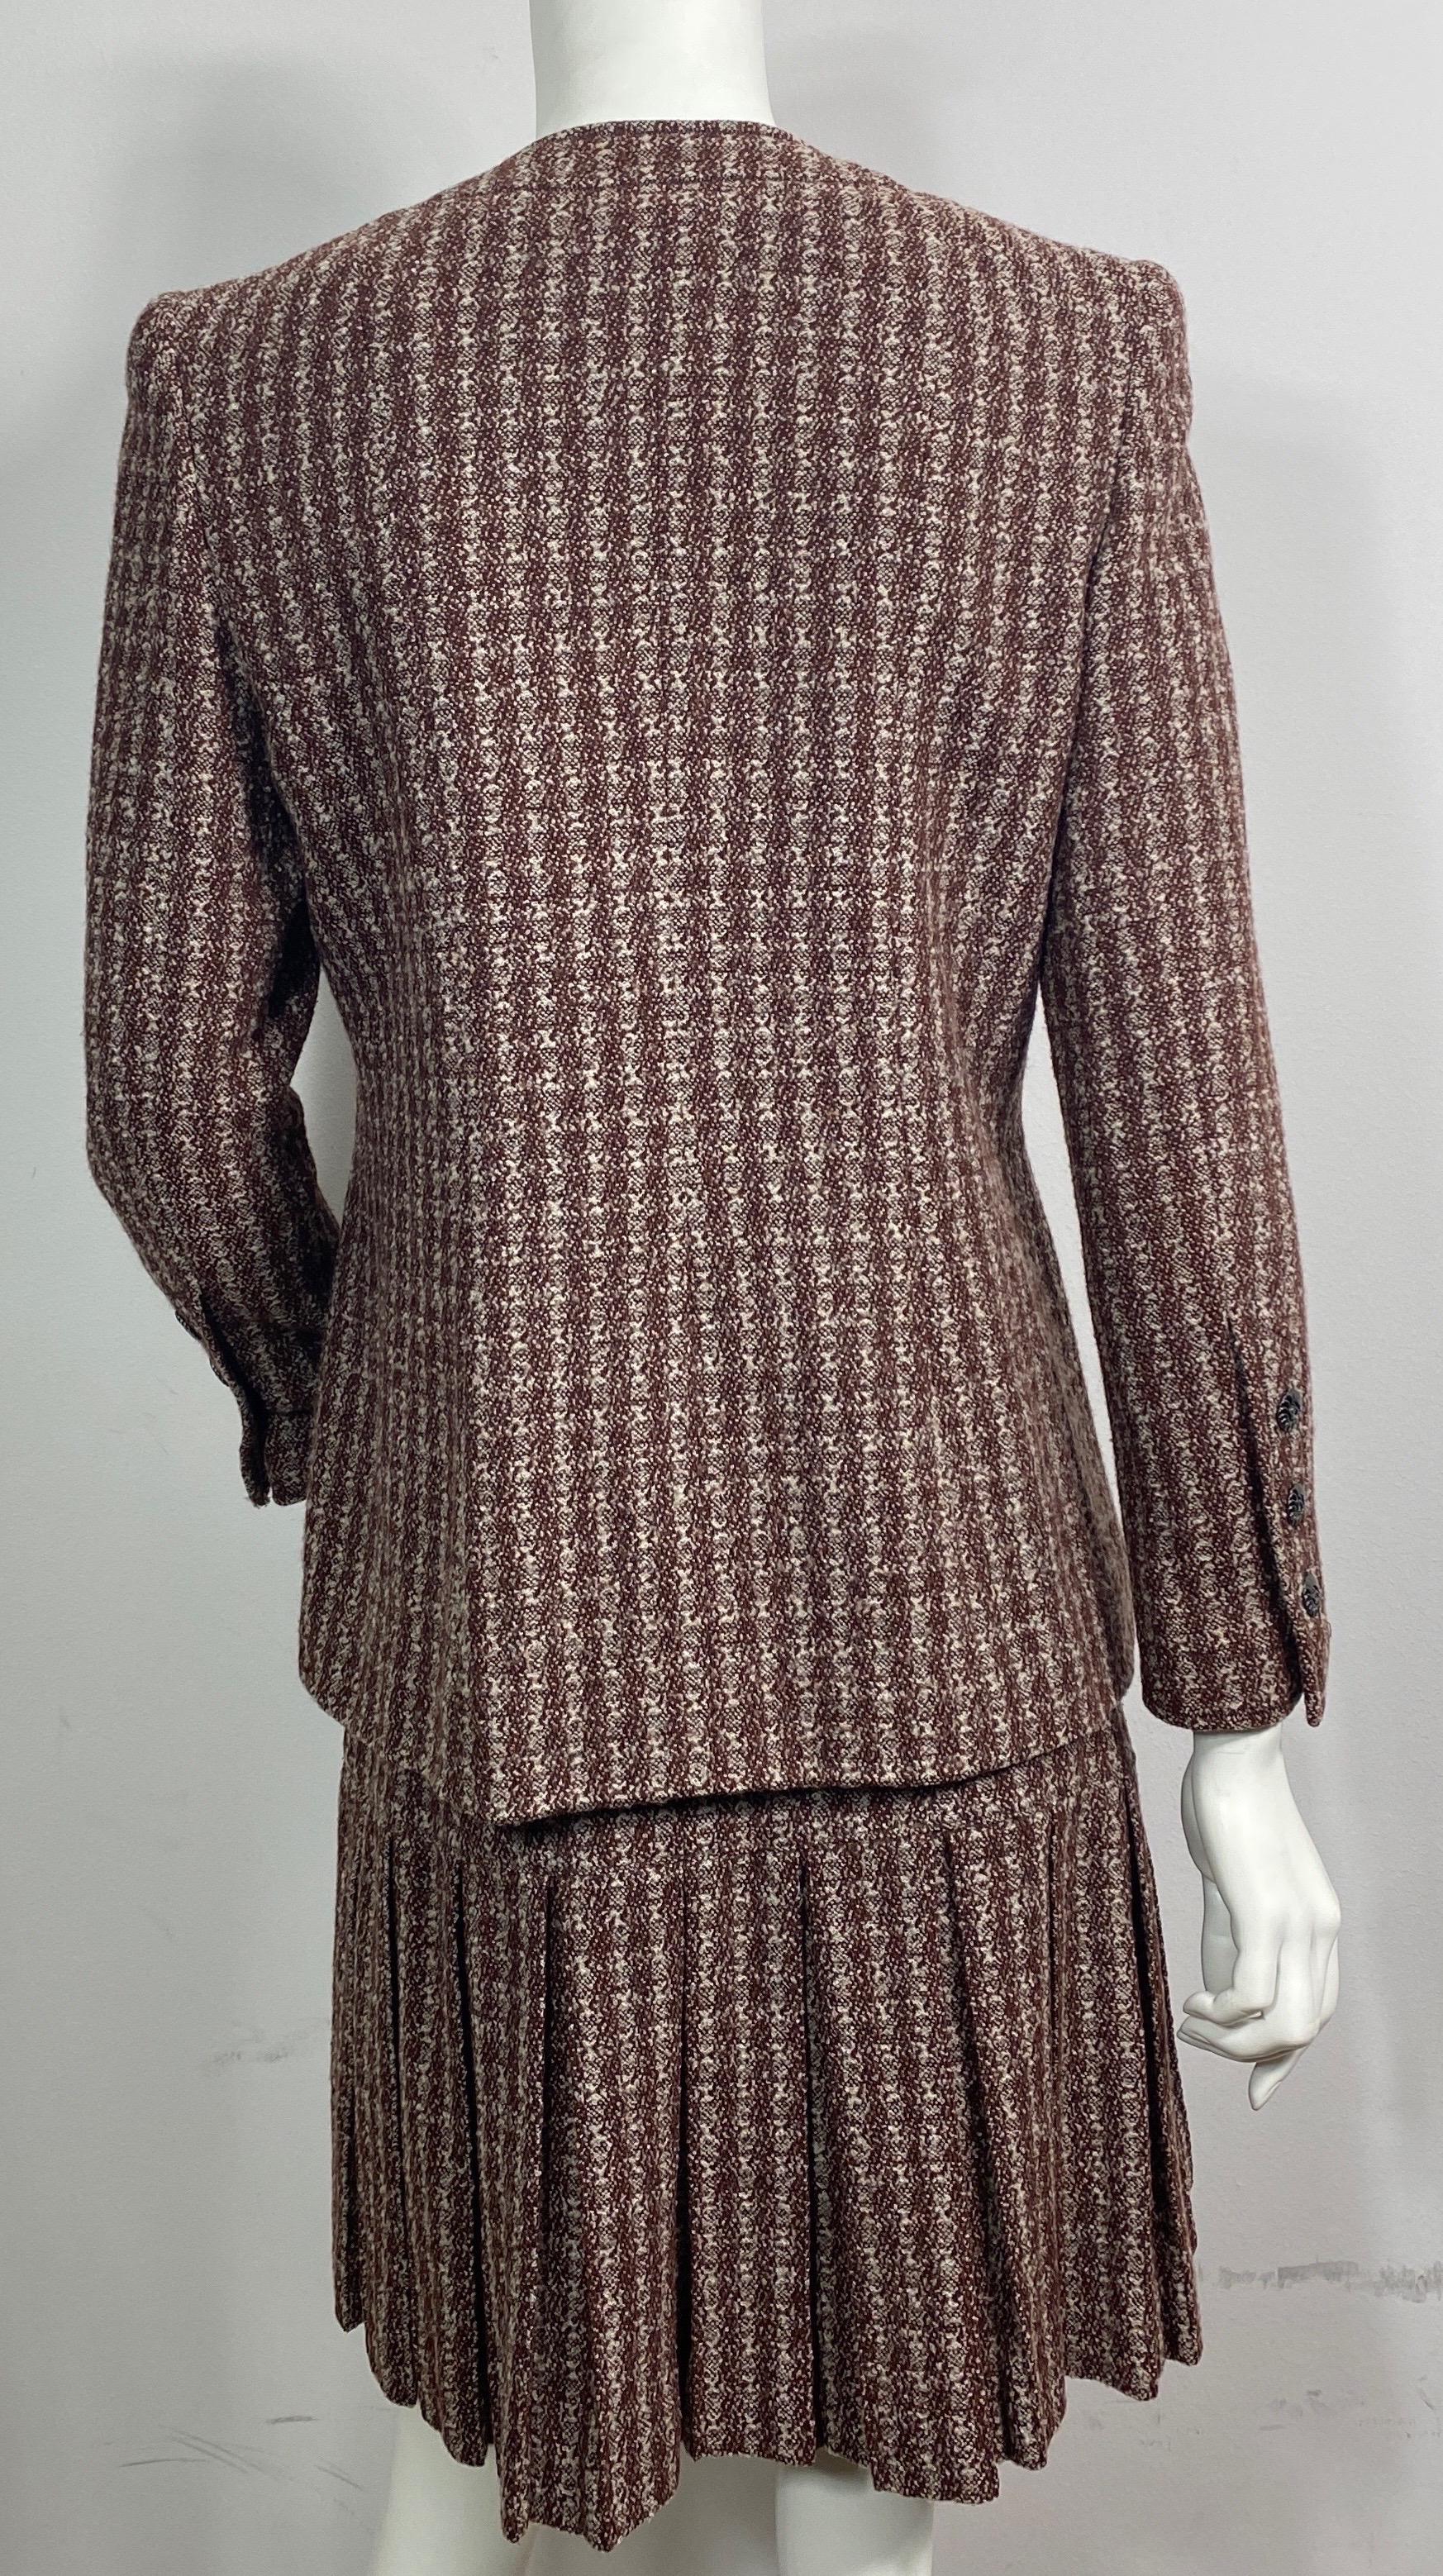 Chanel 1990’s Brown and Crème Wool Nailshead Tweed Skirt Suit-size 36 For Sale 8